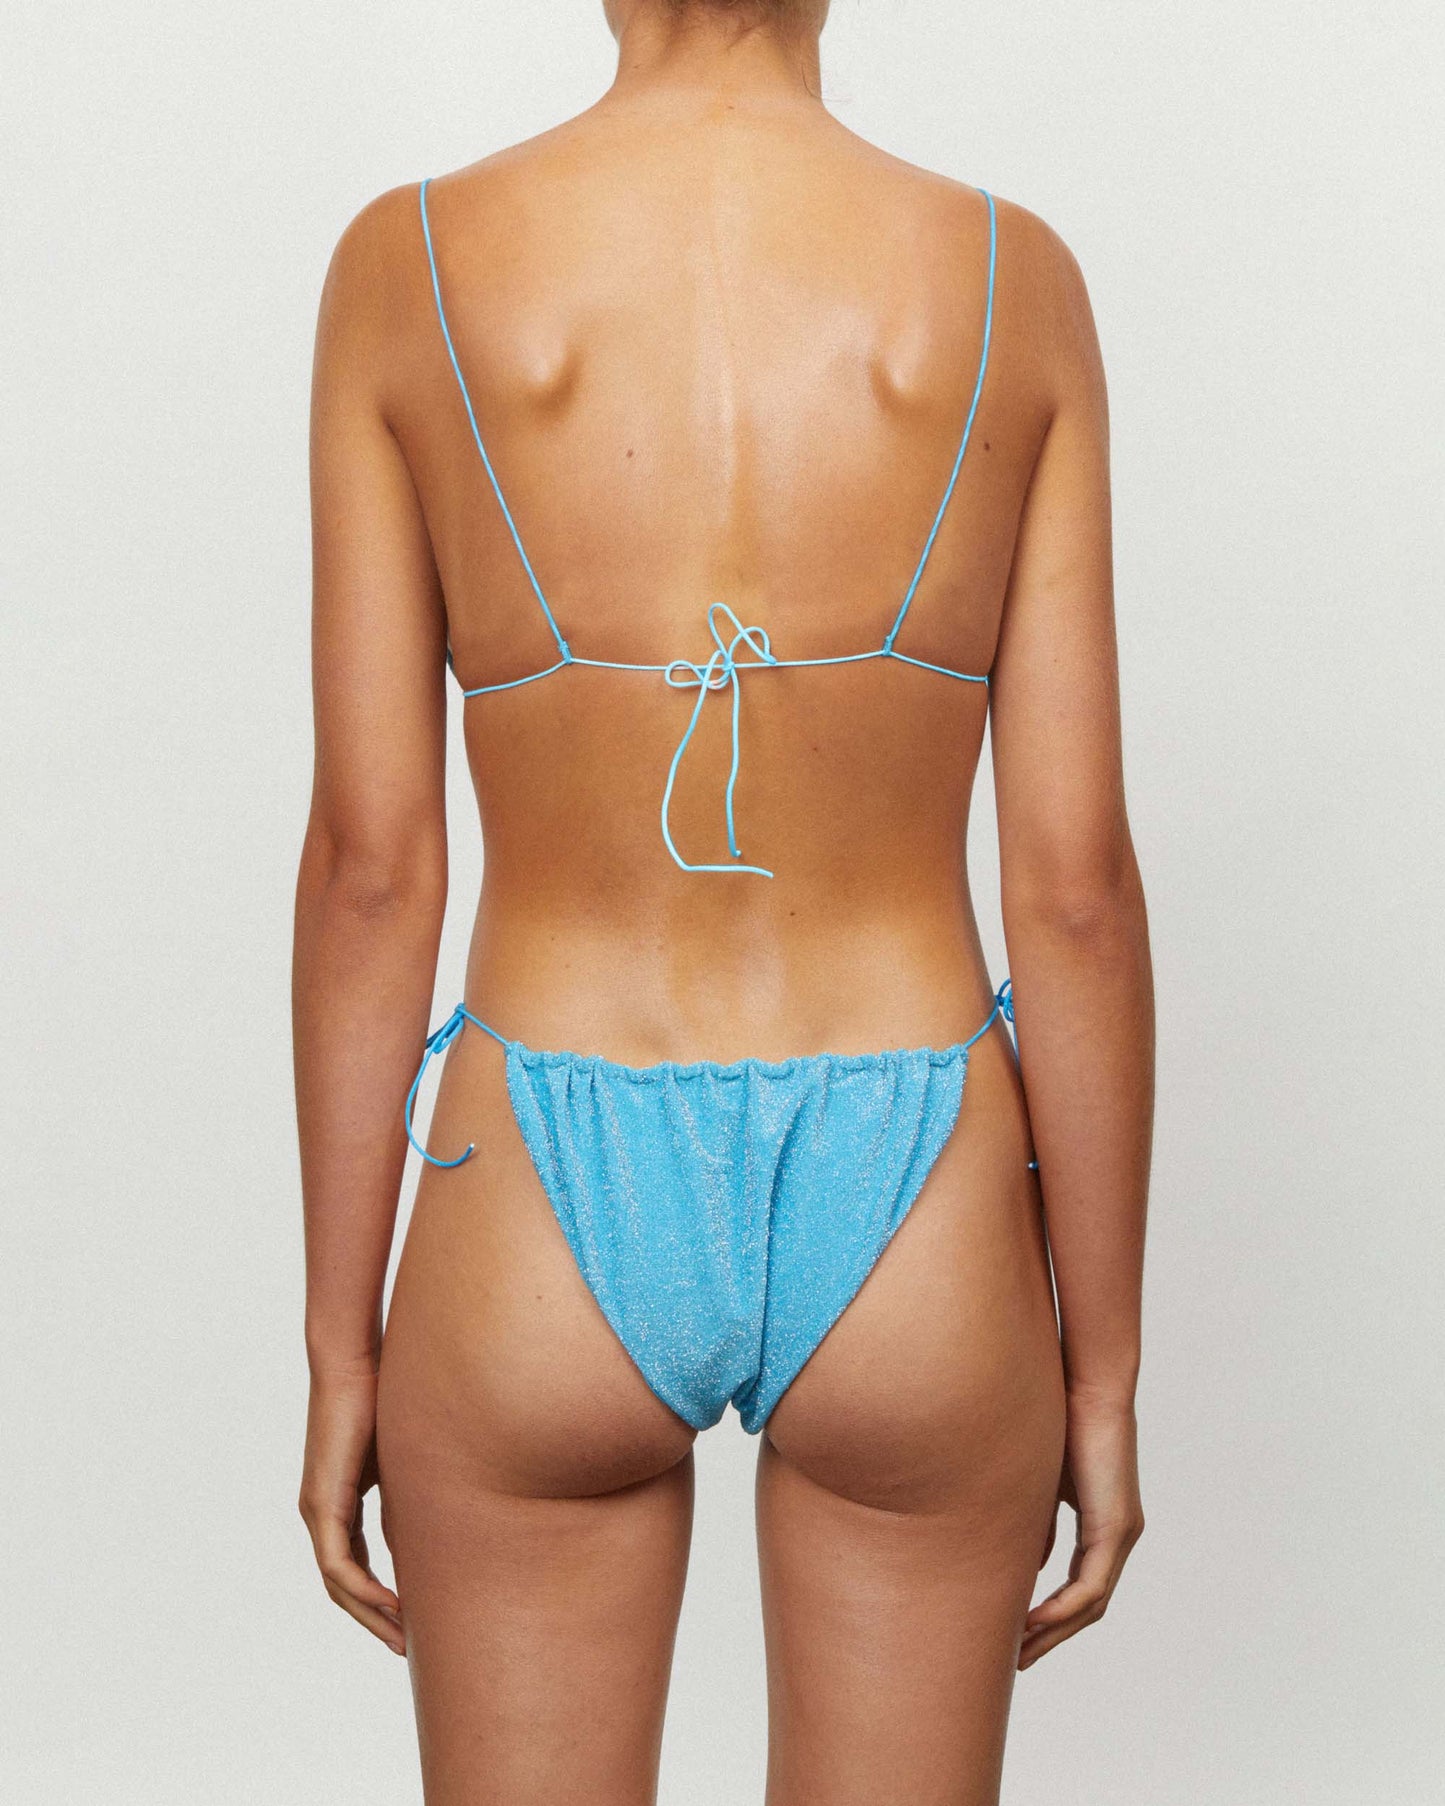 It's Now Cool Swimwear - Gathered Tie Pant - Turquoise Lurex